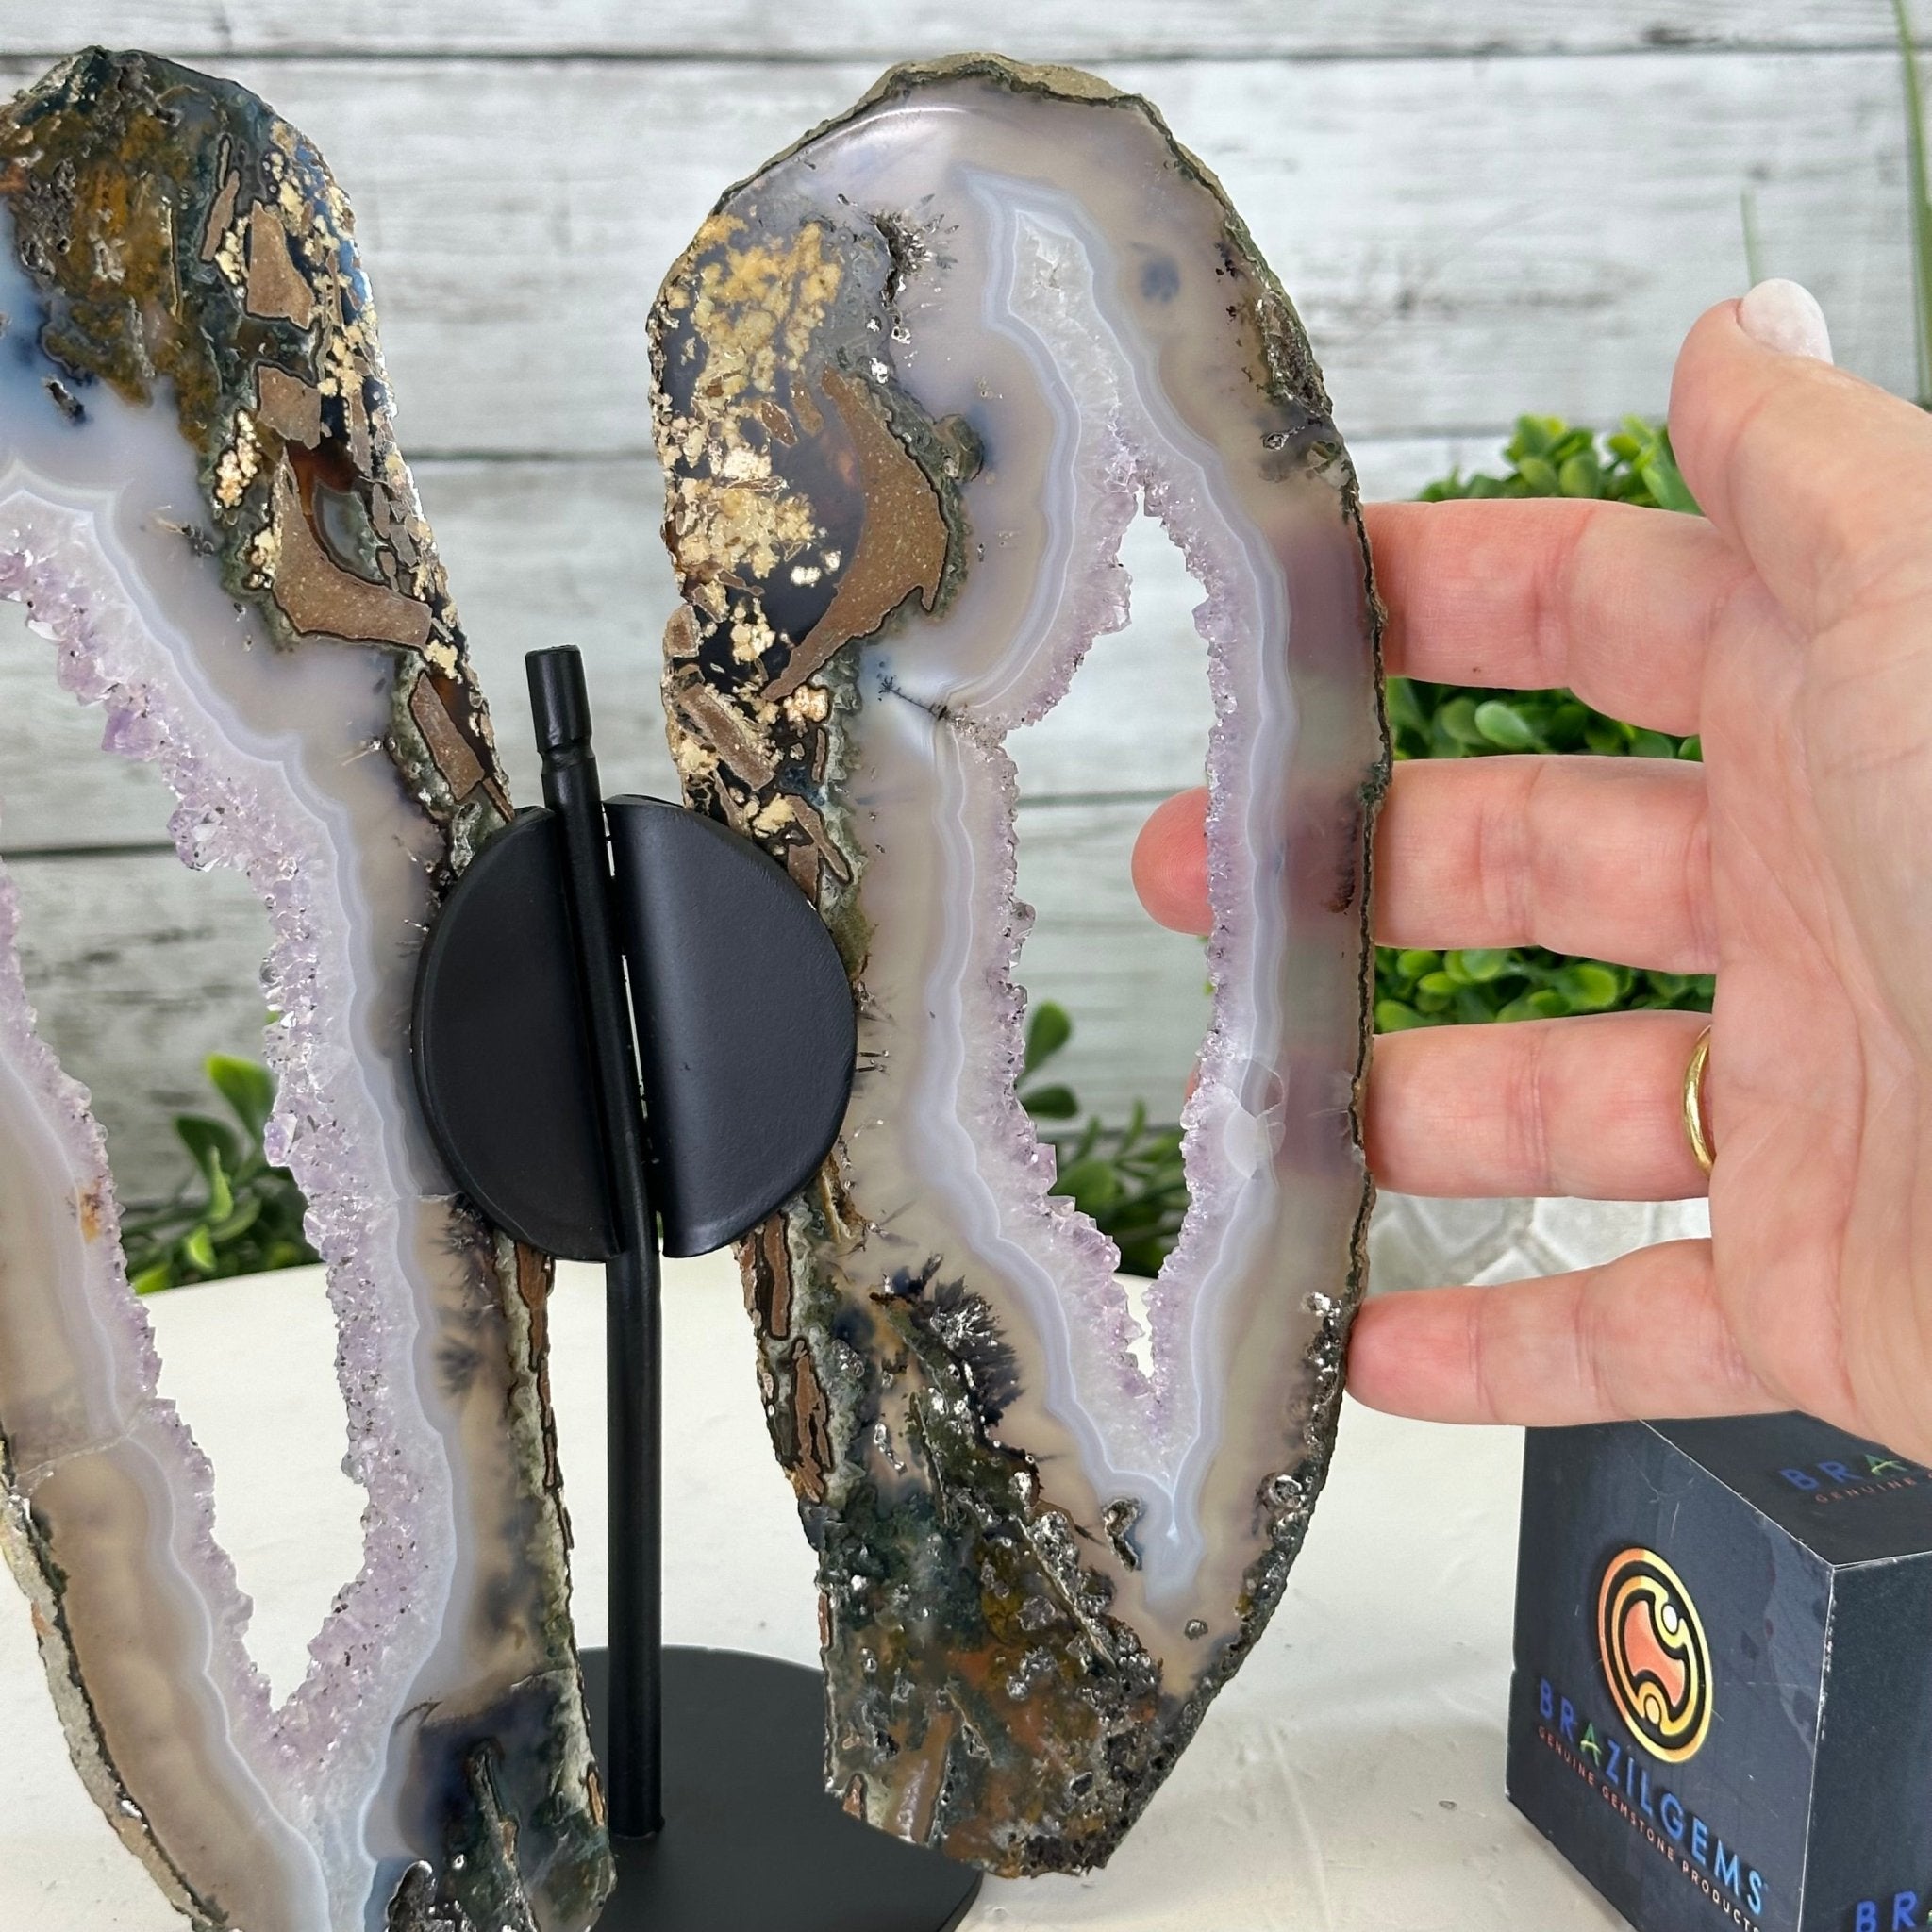 Natural Brazilian Agate "Butterfly Wings", 8.8" Tall #5050NA-104 - Brazil GemsBrazil GemsNatural Brazilian Agate "Butterfly Wings", 8.8" Tall #5050NA-104Agate Butterfly Wings5050NA-104